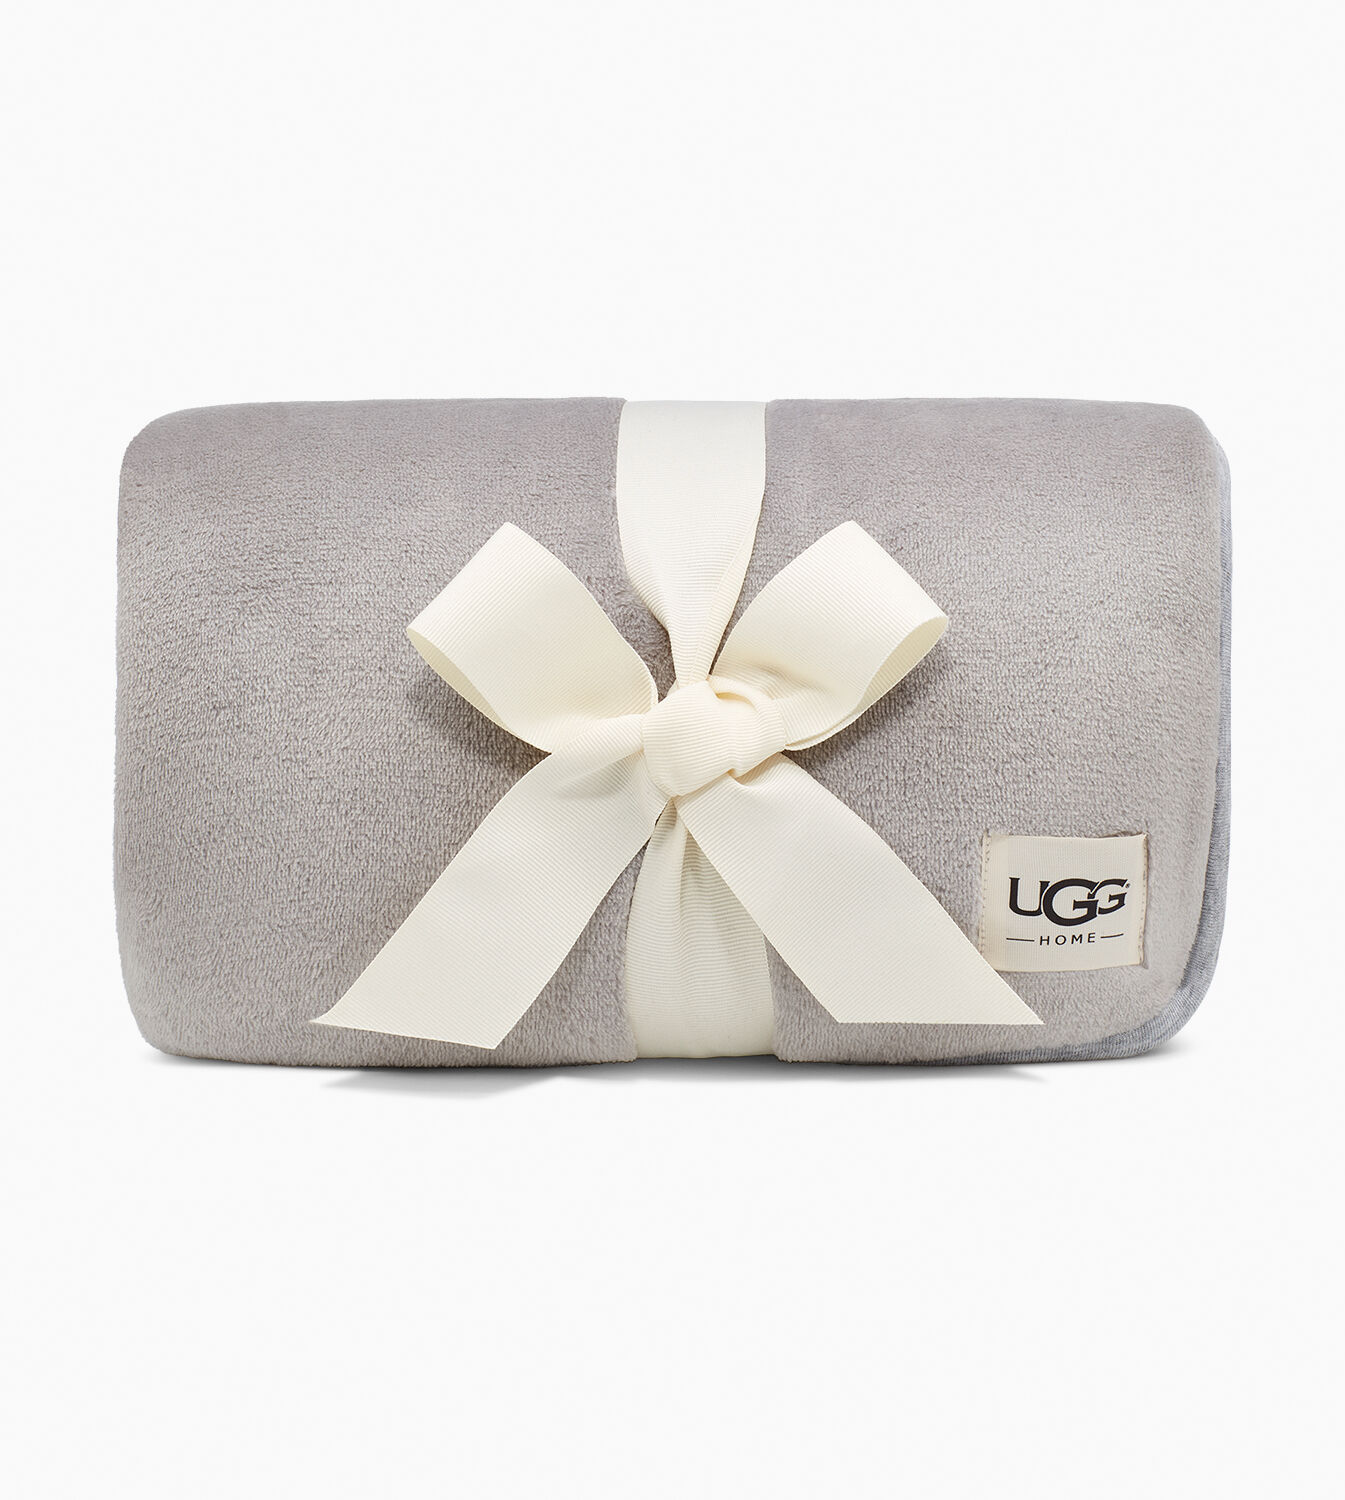 Home View All | UGG® Official